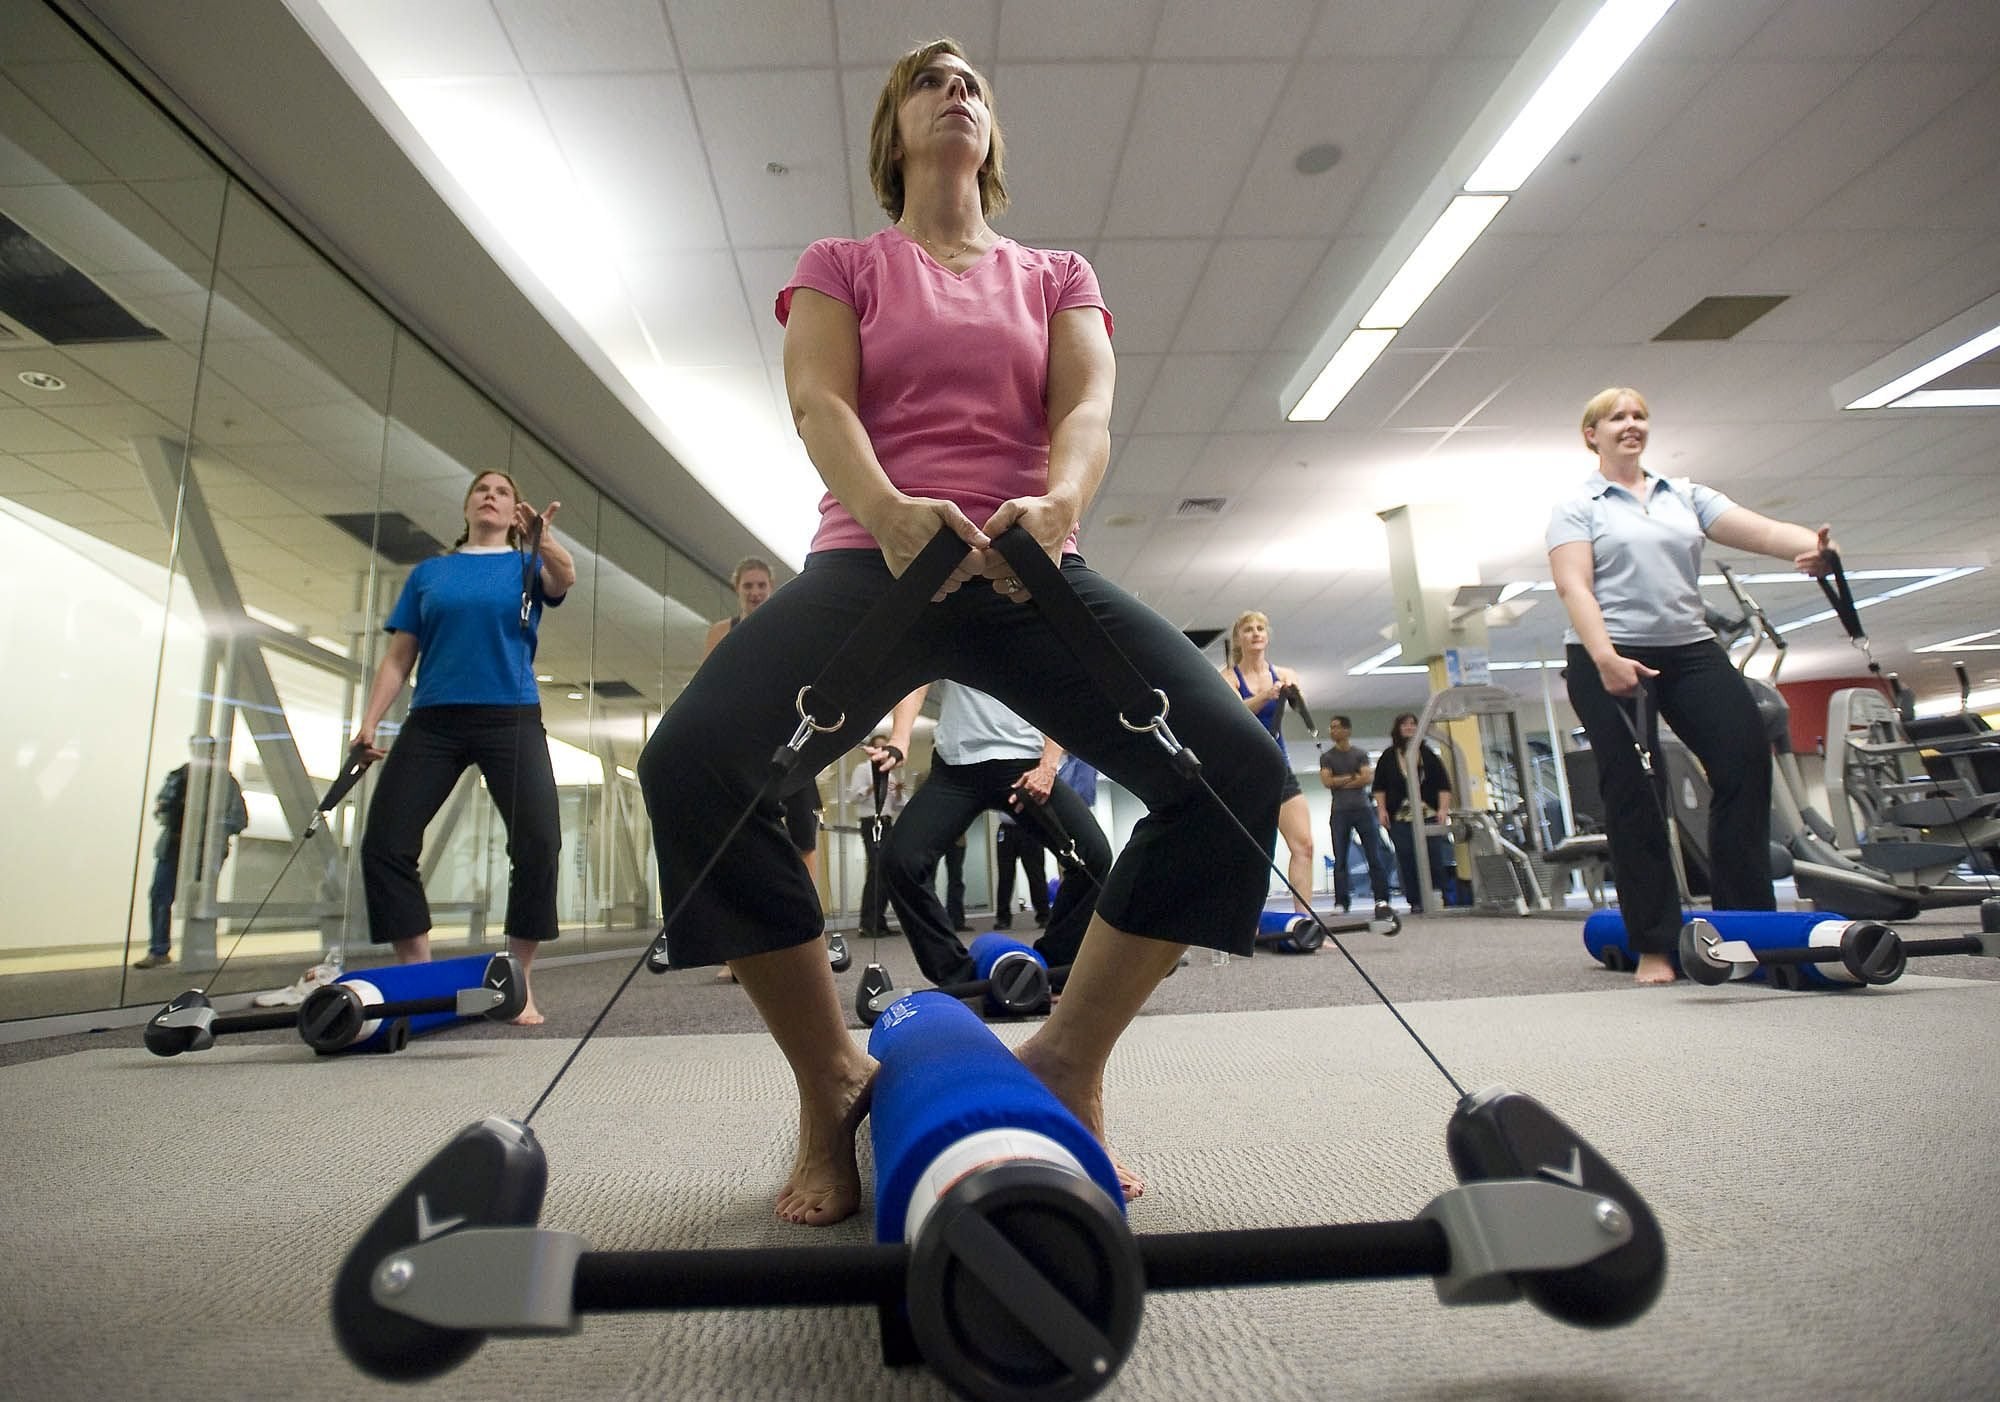 Jill Olafson, 41, works out with other Nautilus employees to familiarize themselves with the company's first new fitness product in several years: the CoreBody Reformer.